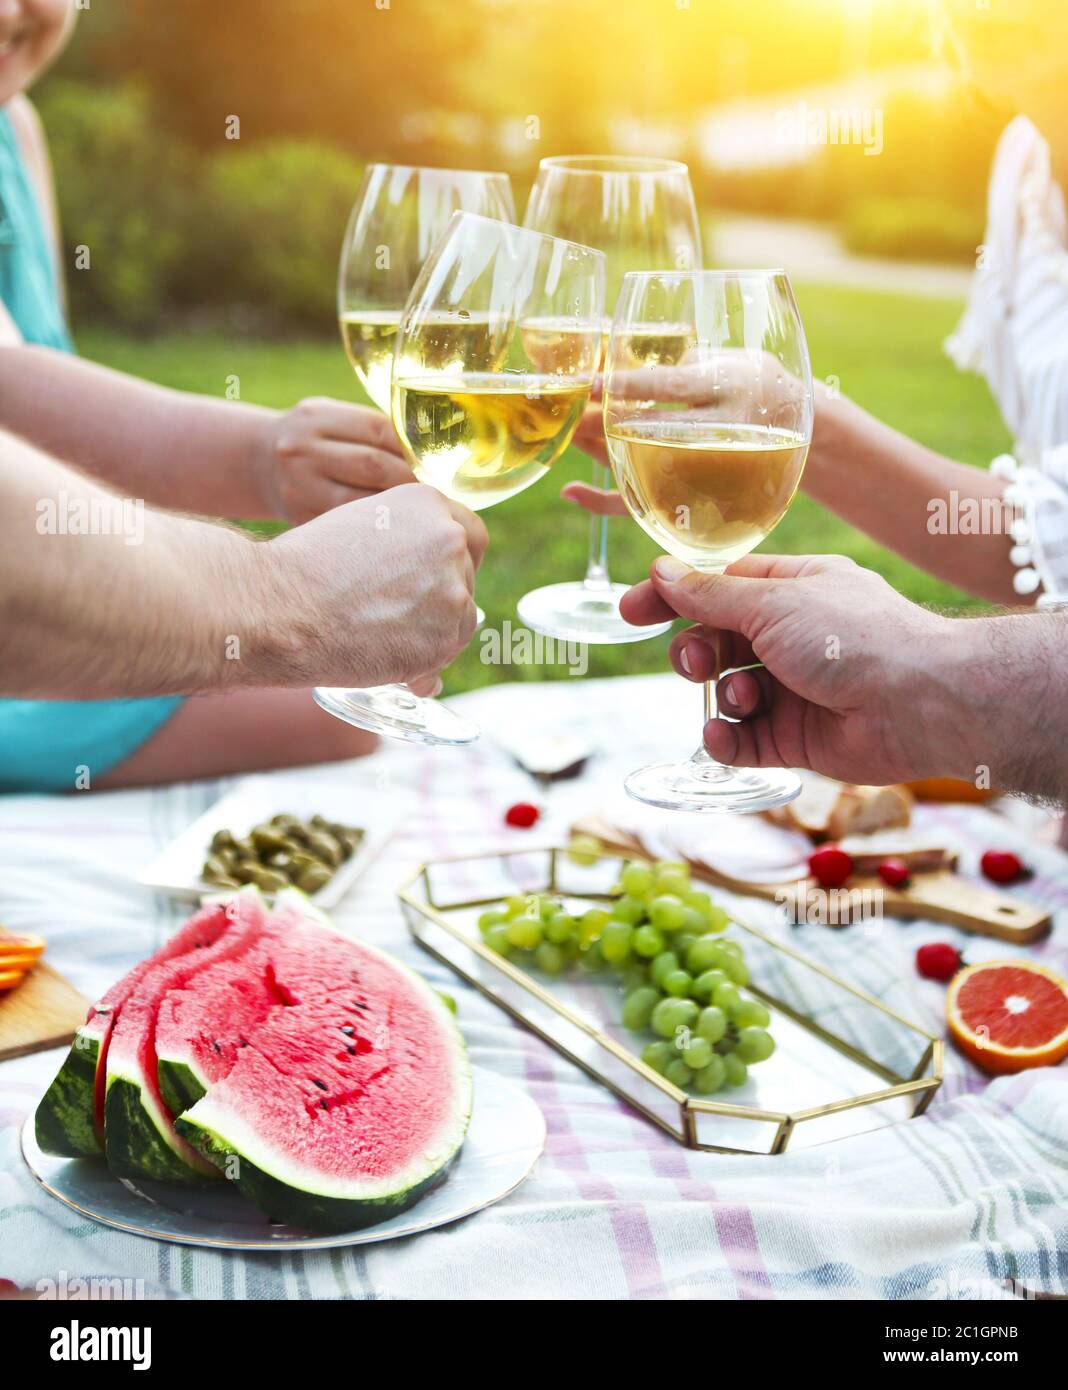 Summer picnic with white wine Stock Photo